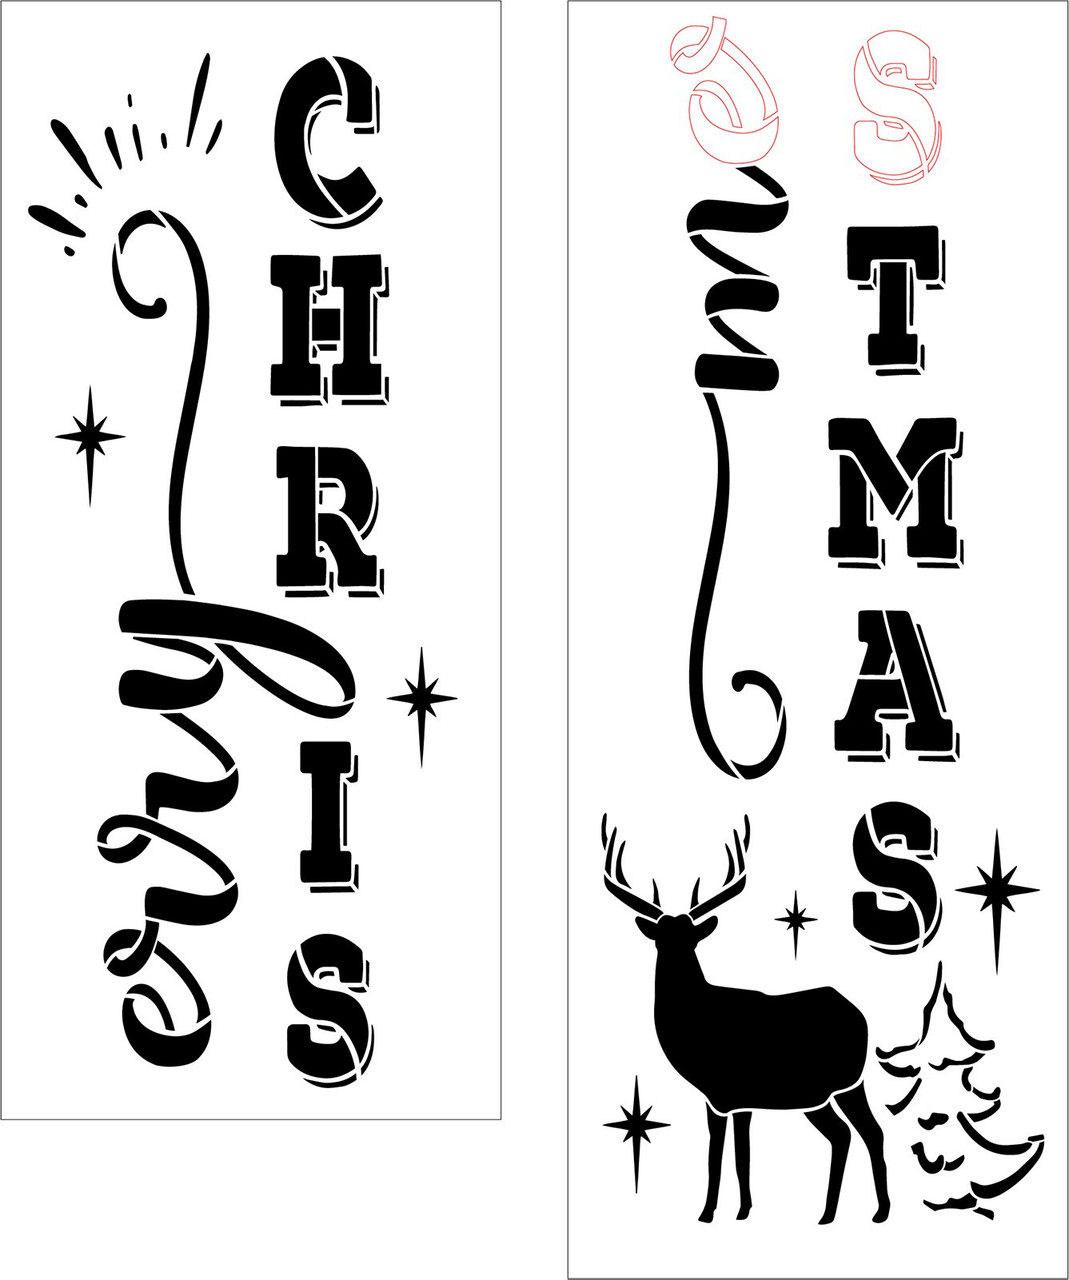 Merry Christmas Tall Porch Leaner Sign Stencil by StudioR12 - 4ft - USA Made - Craft DIY Winter Holiday Home Decor | Paint Reversible Porch Wood Sign (4 ft)